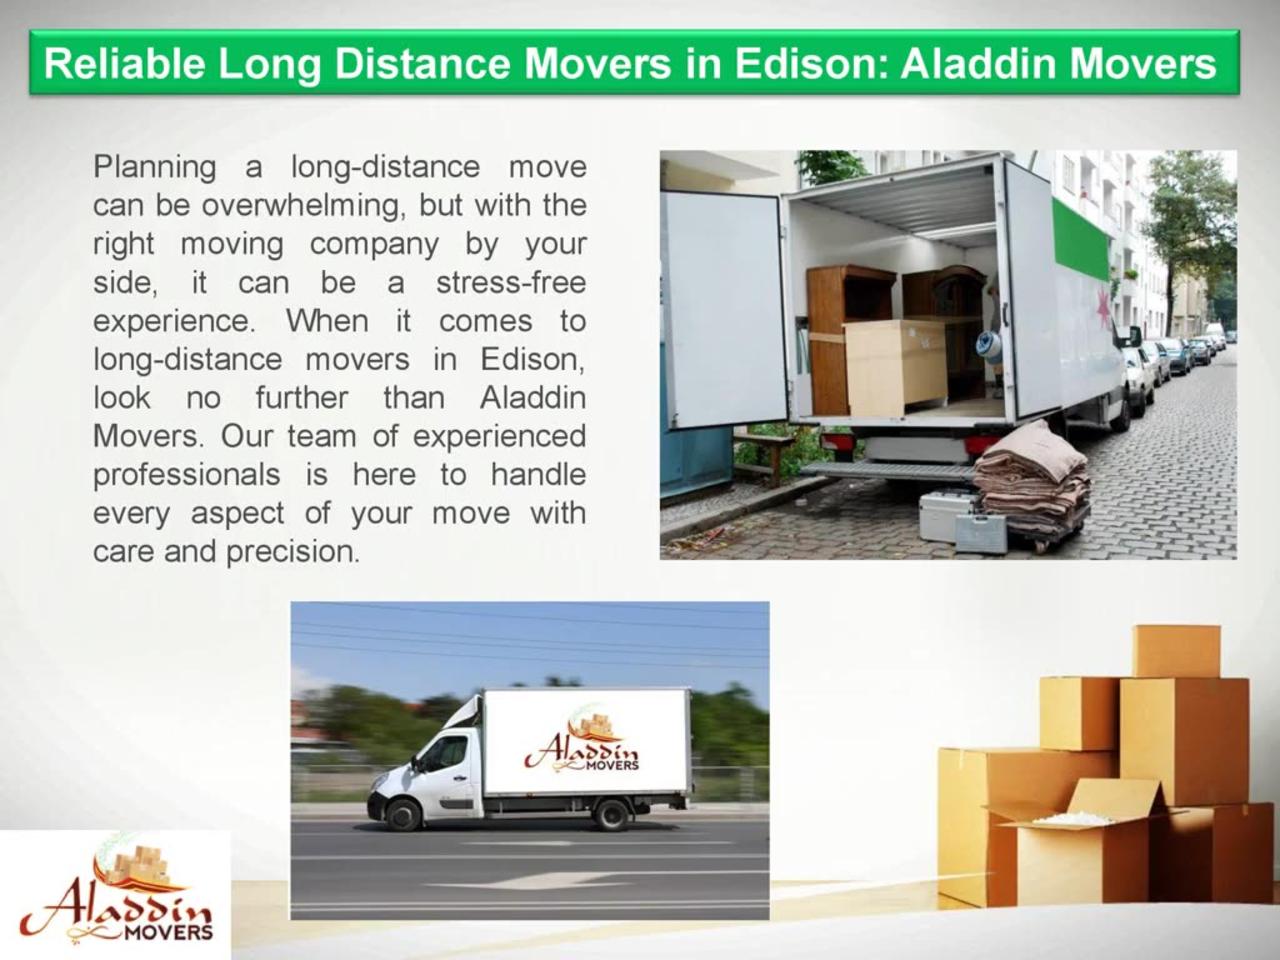 Reliable Long Distance Movers in Edison: Aladdin Movers